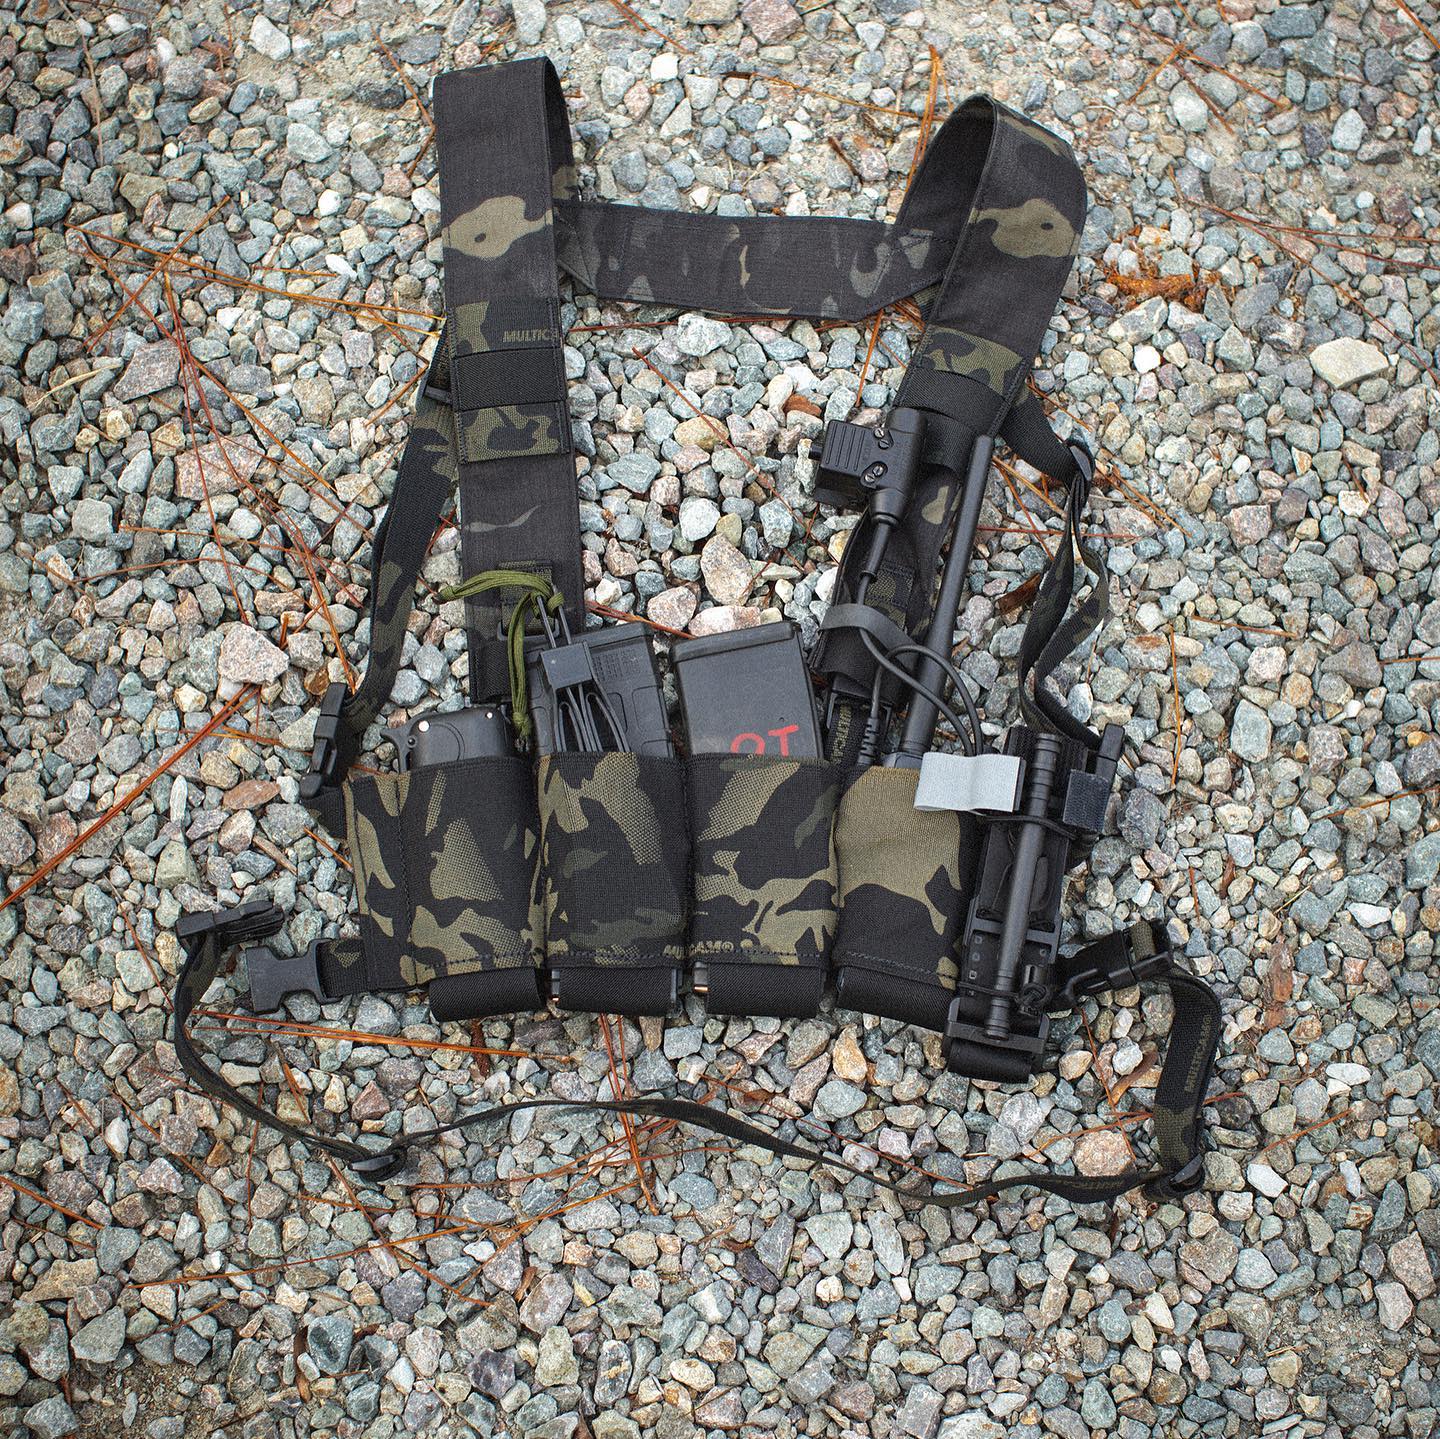 Spiritus Systems Bank Robber Chest Rig Review – The BB Warrior